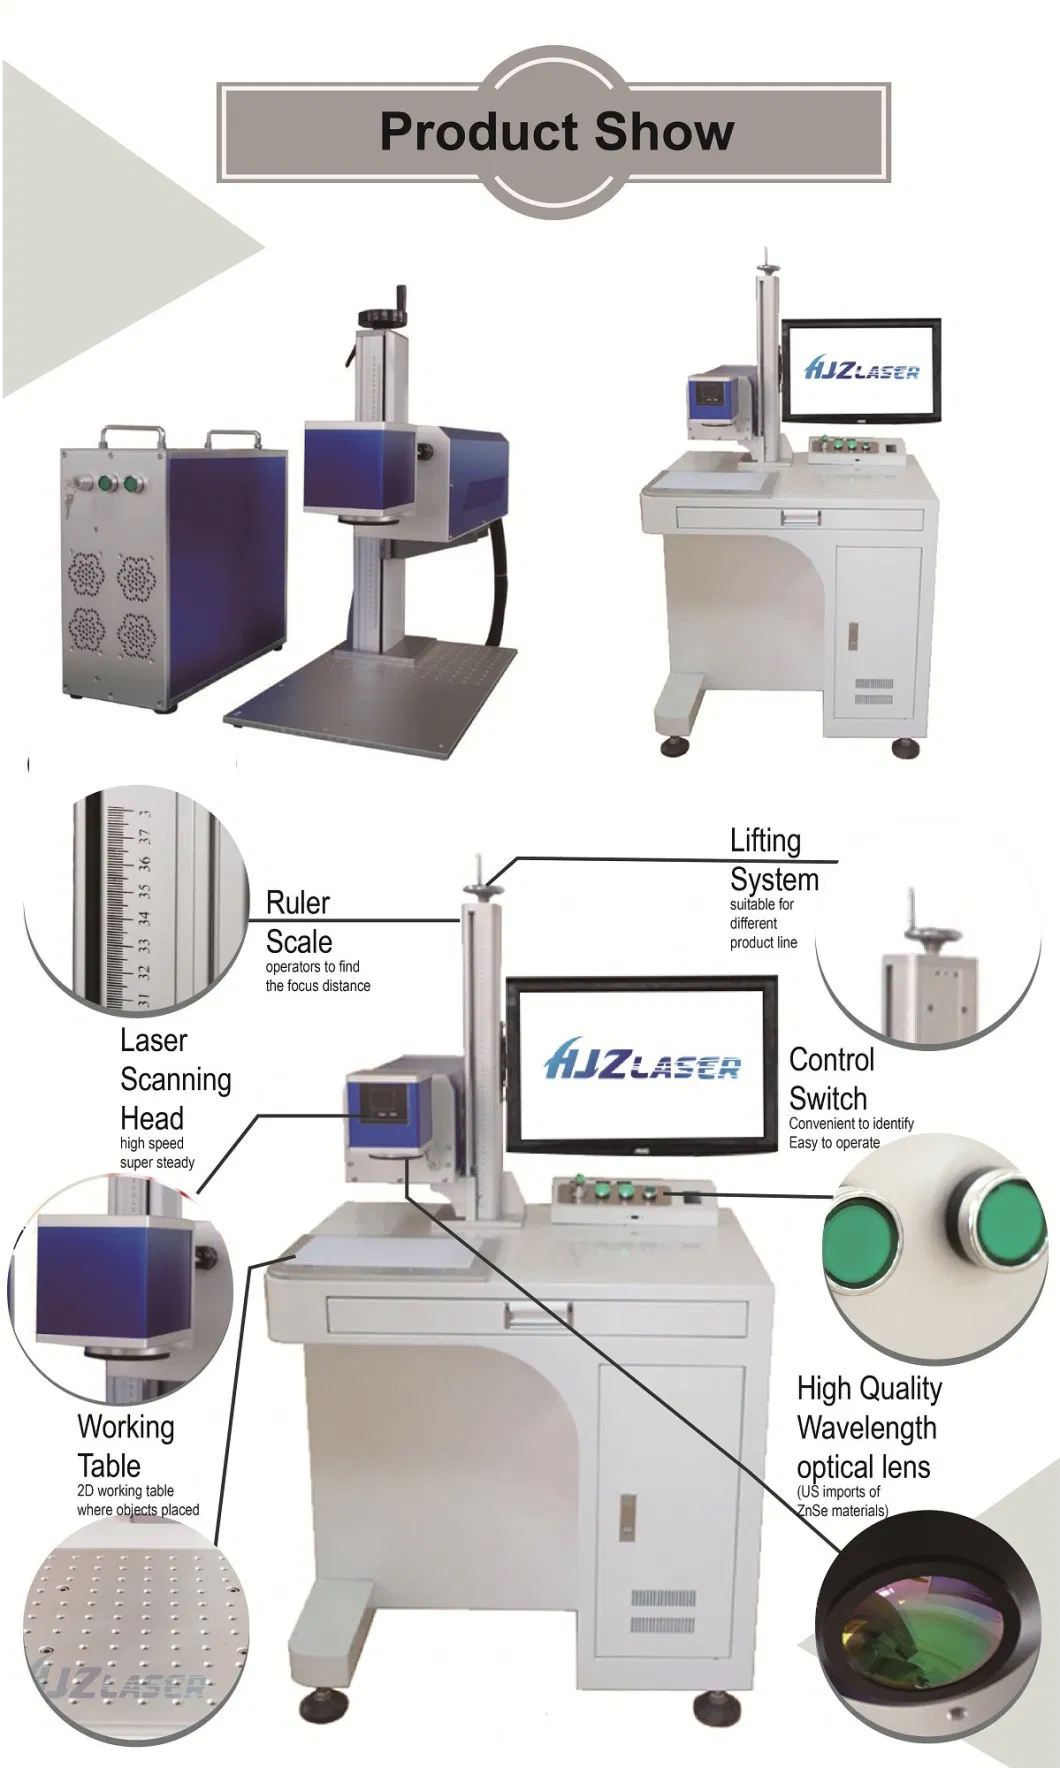 Newest Flying CO2 Laser Marking Machine for Acrylic/Plastic/Leather/Surgical Instruments